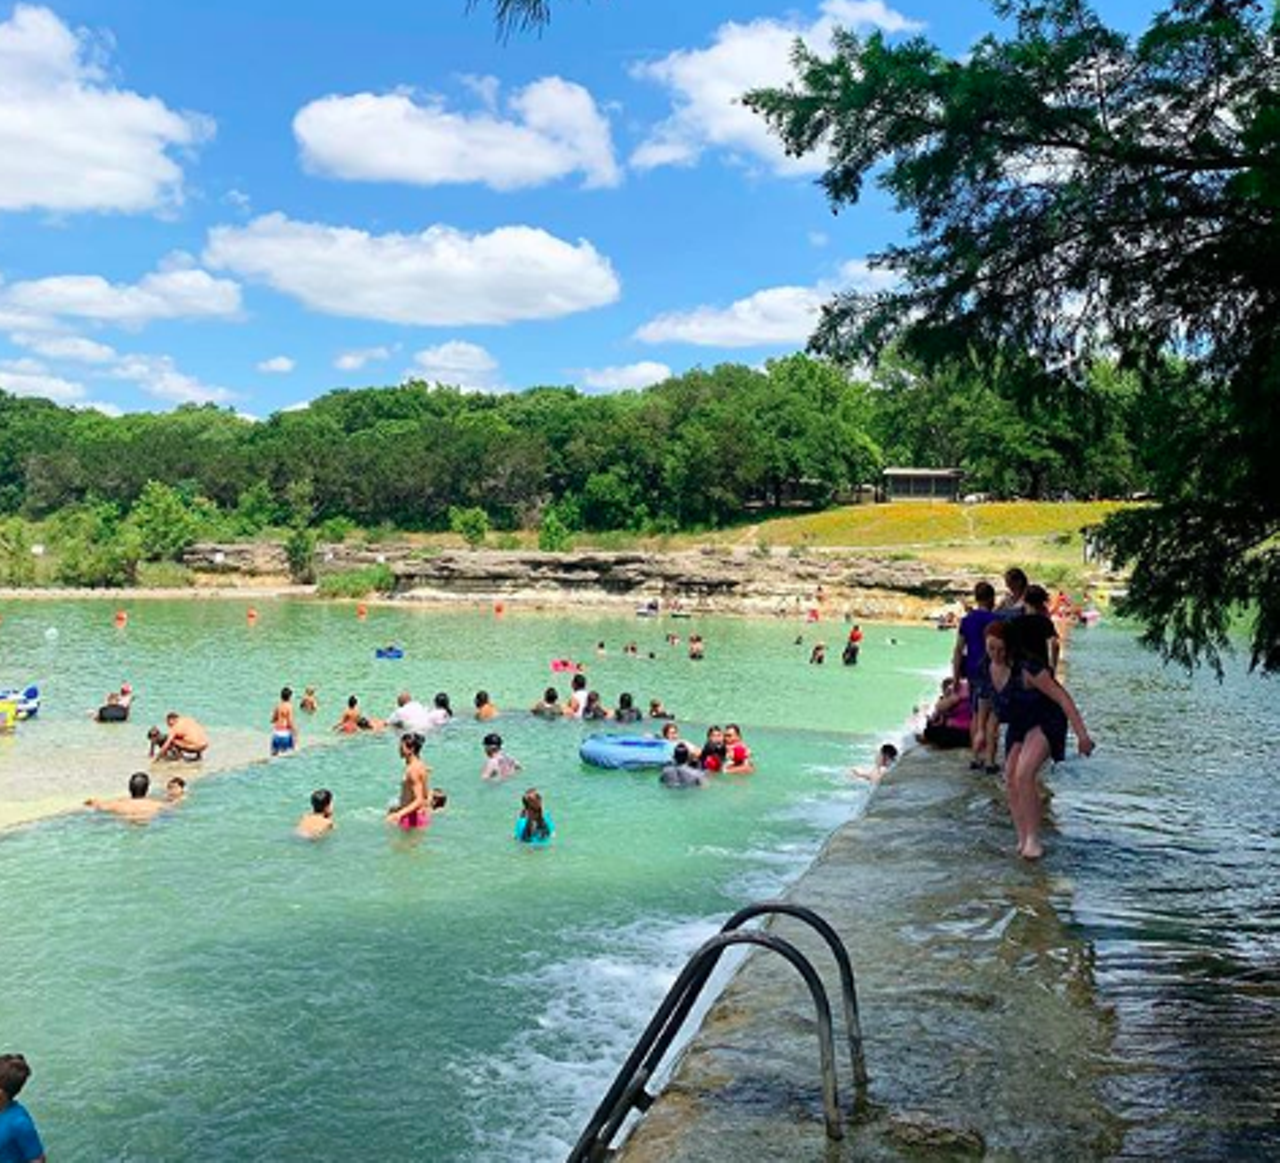 Blanco State Park
101 Park Road 23, Blanco, (830) 833-4333, tpwd.texas.gov
Just a short drive away from the Alamo City you’ll find a nature oasis where you can swim, fish (you don’t need a license so long as you’re on the shore), paddle and camp out! The one-mile stretch of river also lets you kick back and explore via the boat or kayak, though you may use that time to go on land to hike and observe nature.
Photo via Instagram / kdewitt13